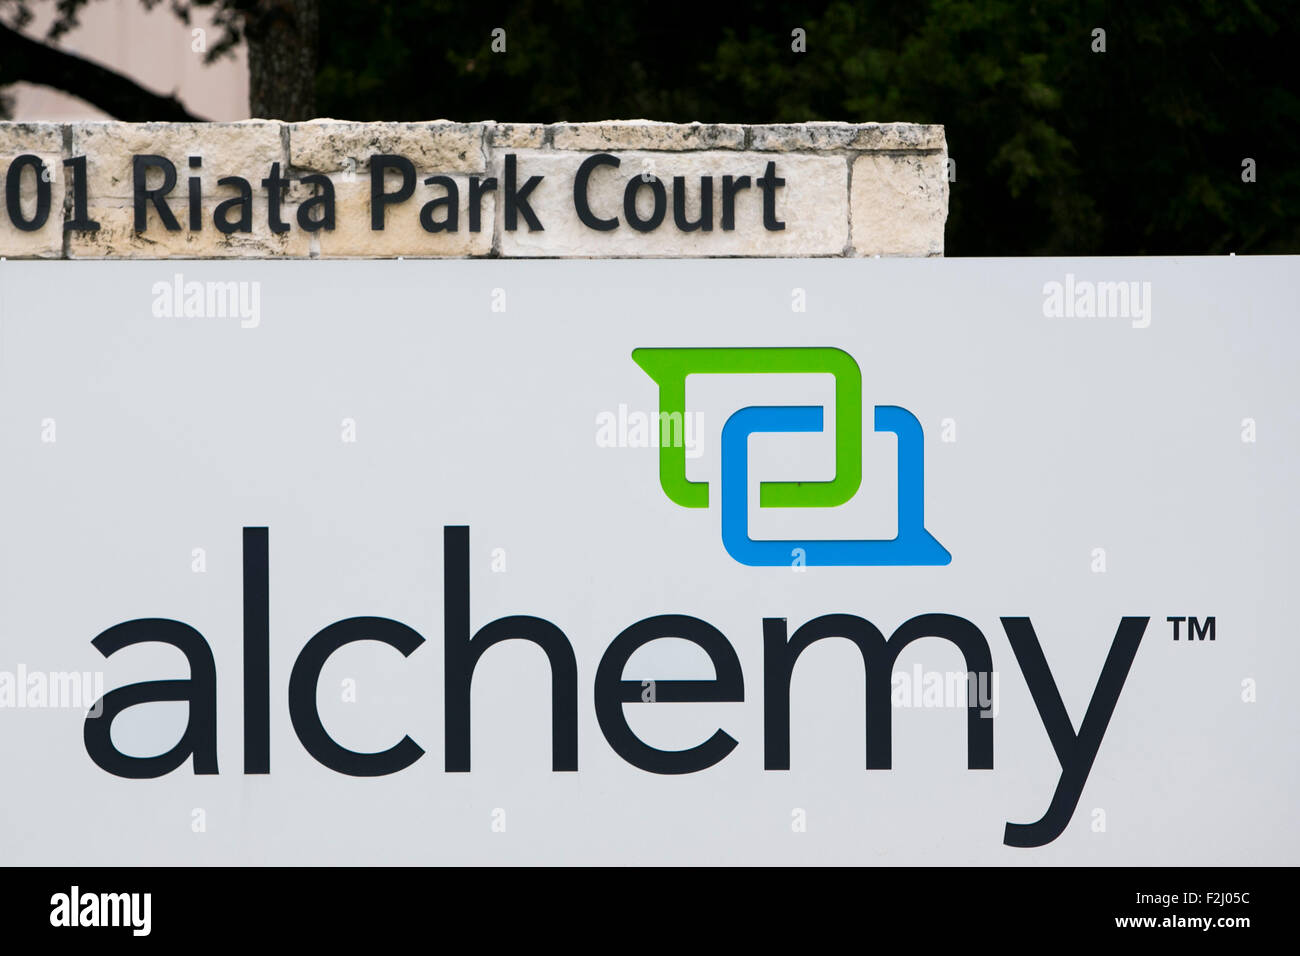 A logo sign outside of the headquarters of Alchemy Systems, LP, in Austin, Texas on September 11, 2015. Stock Photo